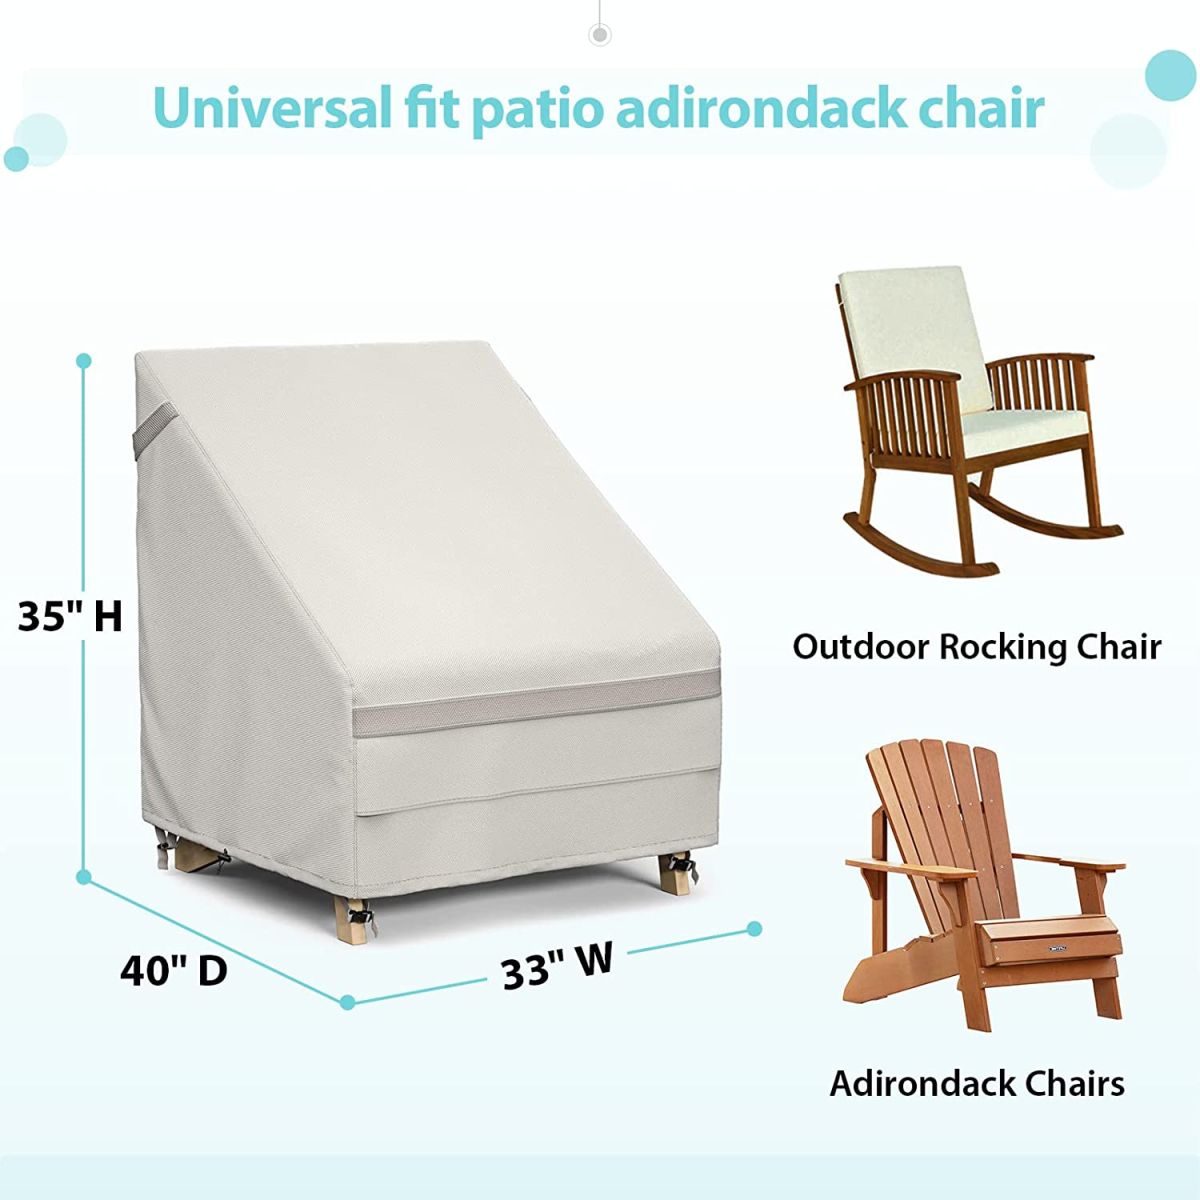 Waterproof Patio Adirondack Chair Covers, Also Fits Outdoor Chair, 33W x 40D x 35H Inches, Heavy Duty & UV Protection, Beige (2-Pack)